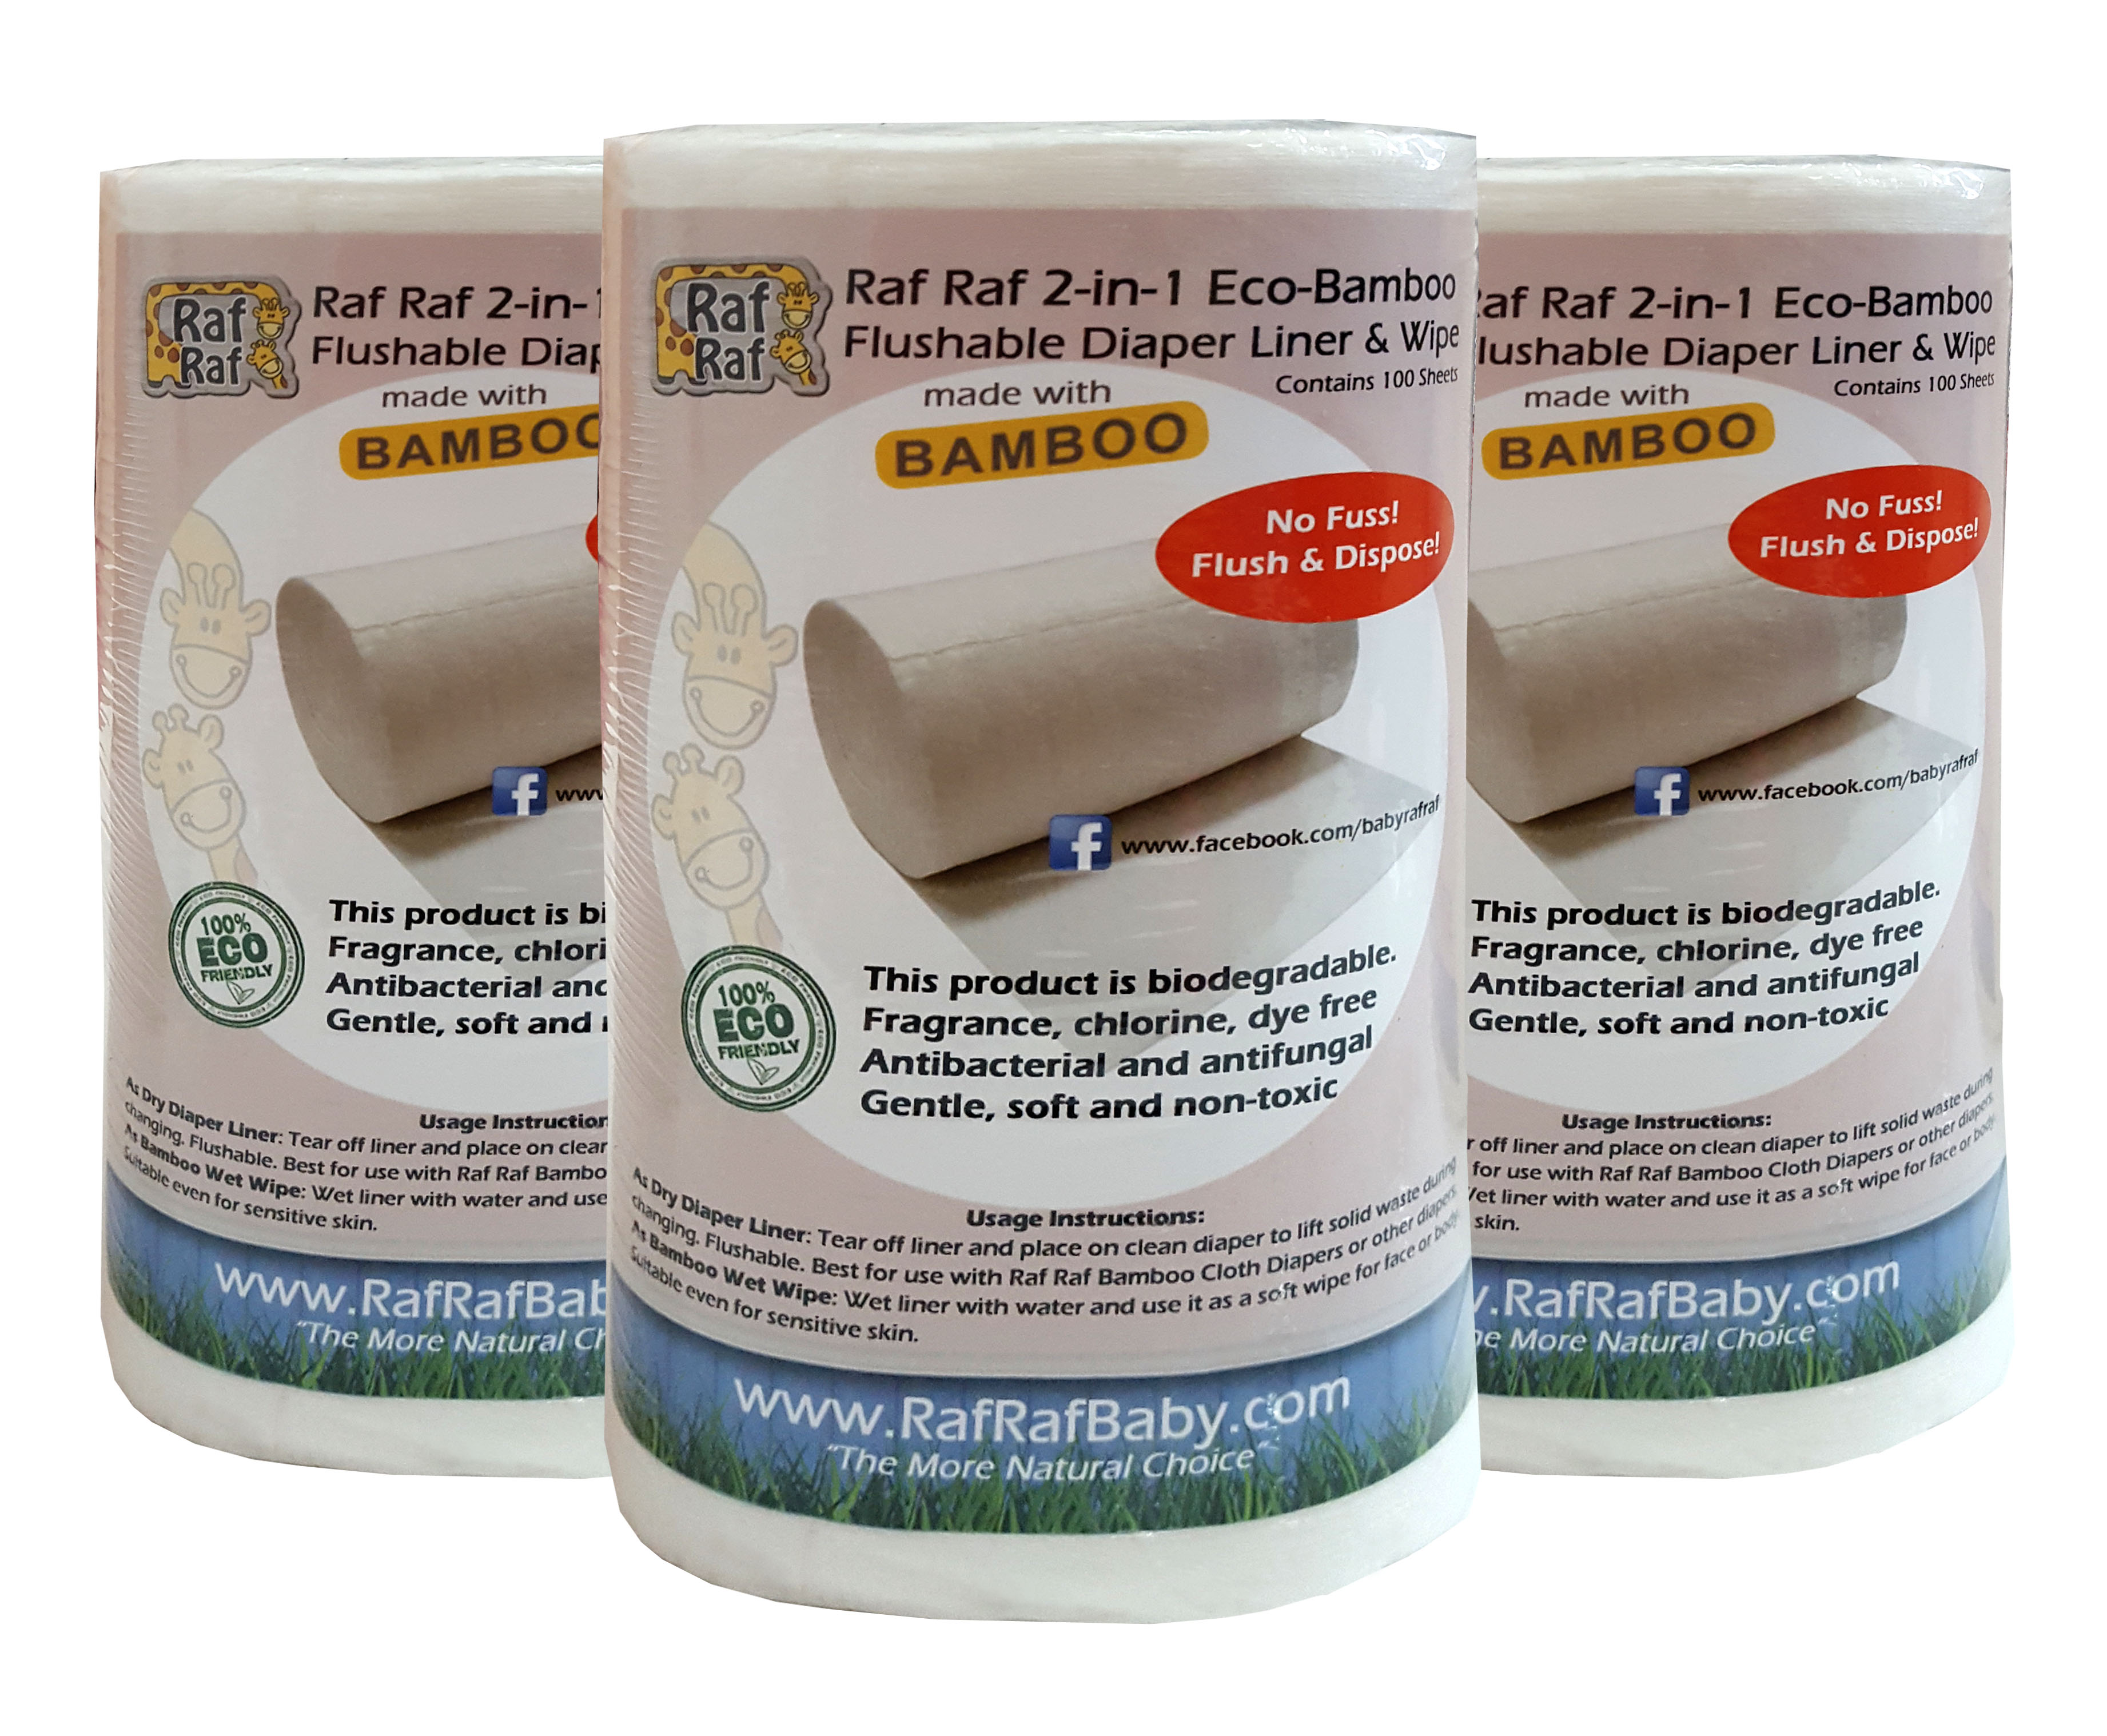 Raf Raf 2-in-1 Eco-Bamboo Flushable Diaper Liner & Wipe (Pack of 3)